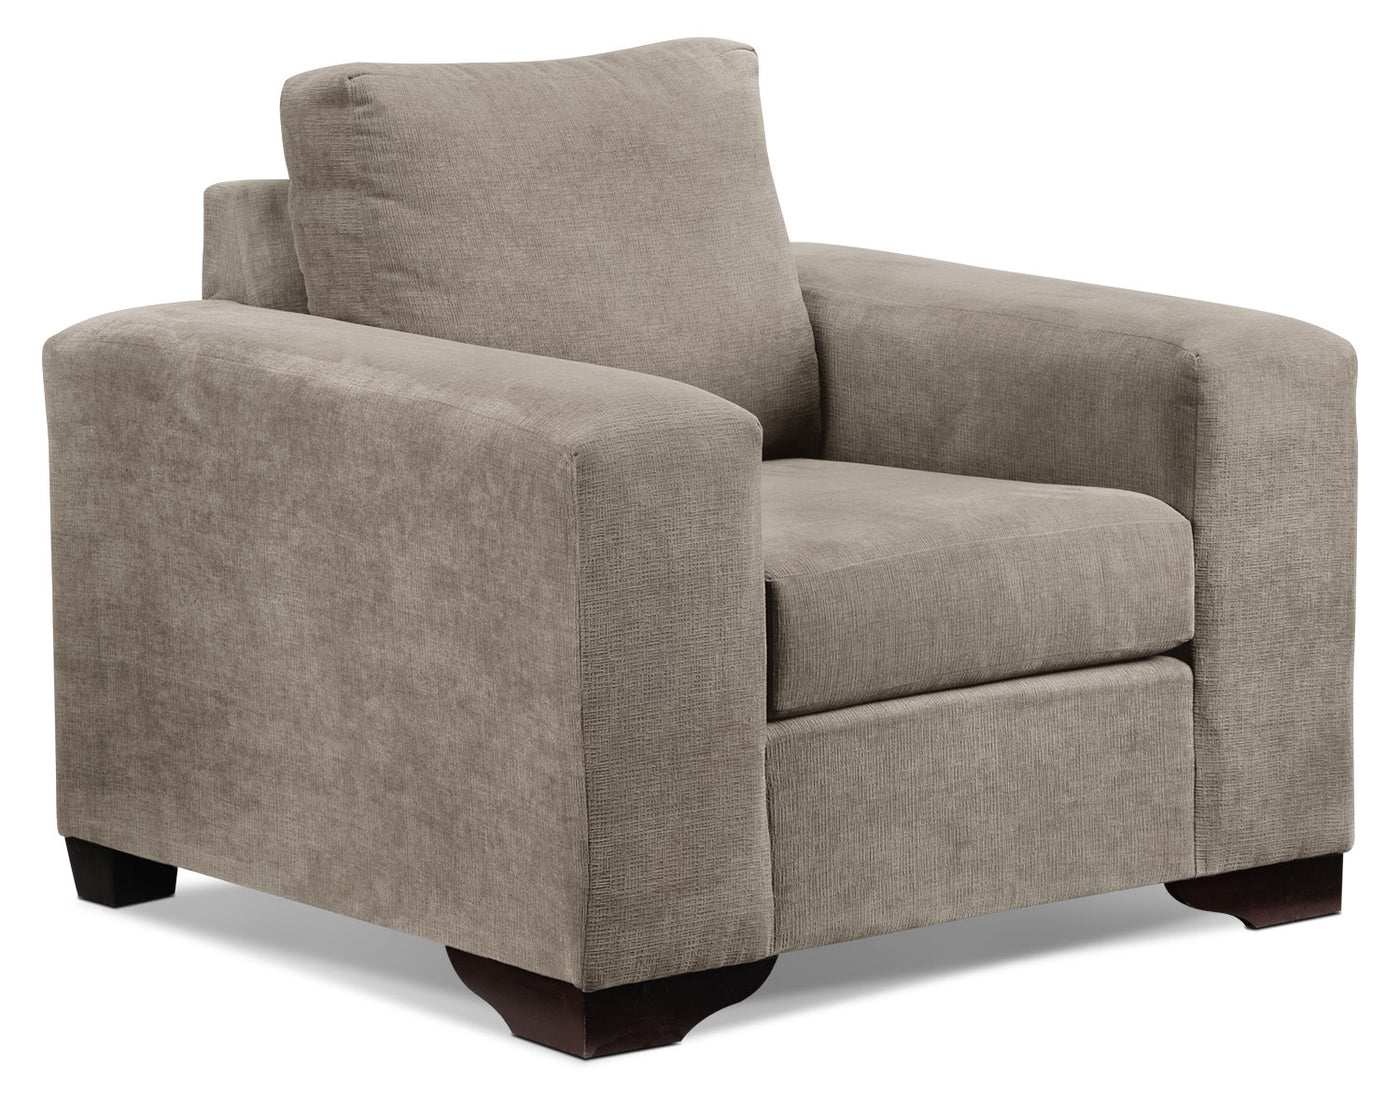 Fava Sofa and Chair Set - Pewter